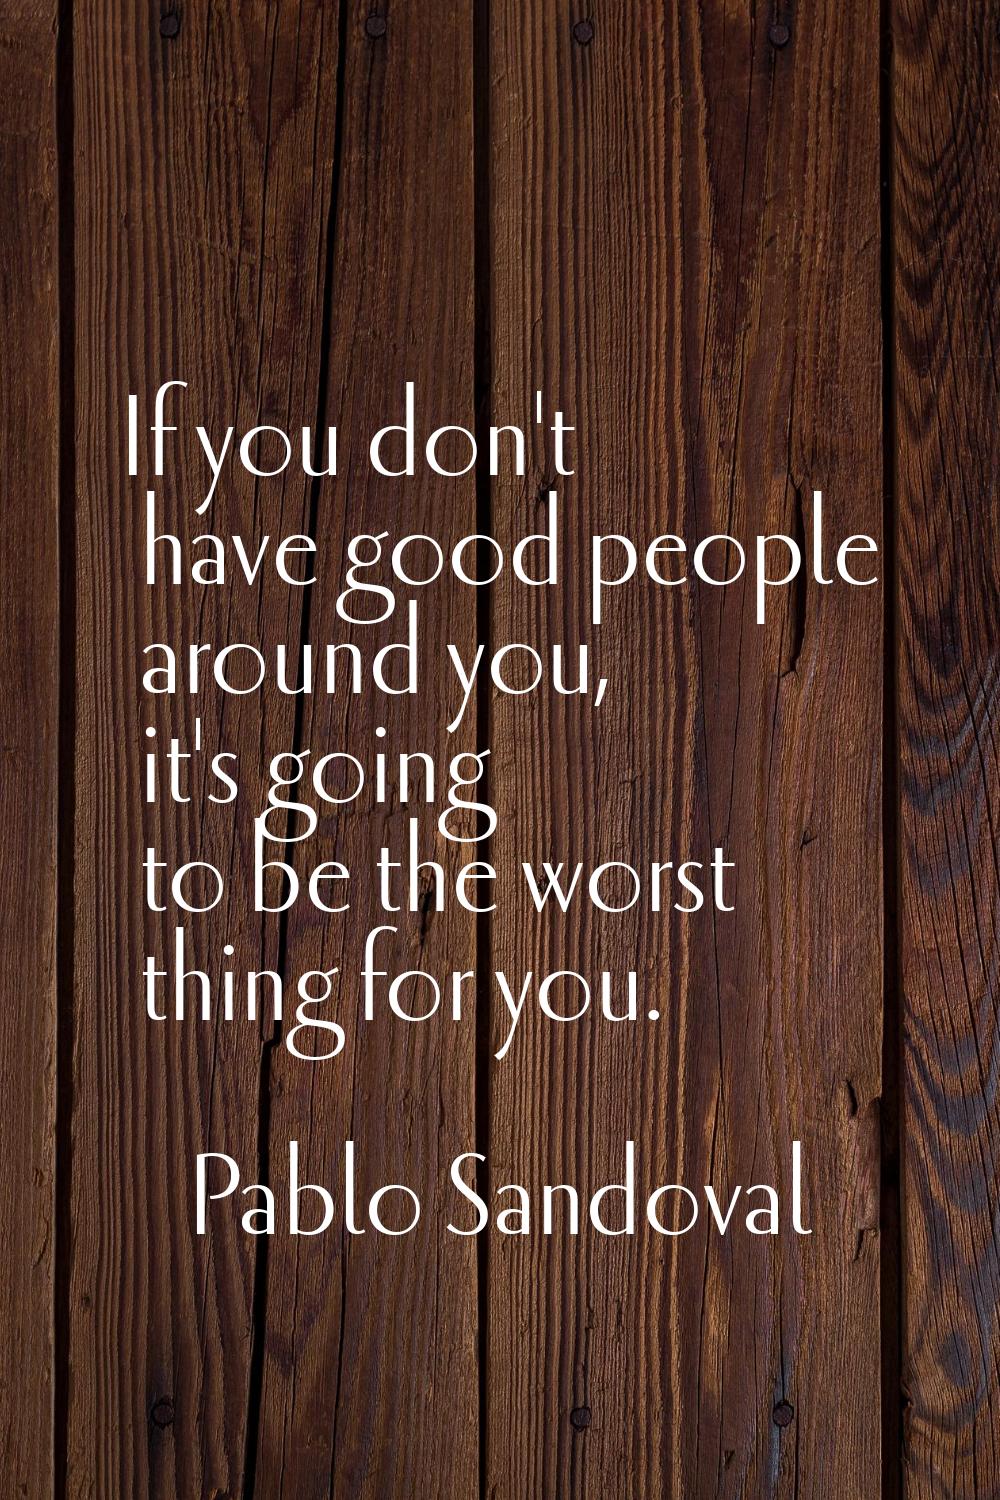 If you don't have good people around you, it's going to be the worst thing for you.